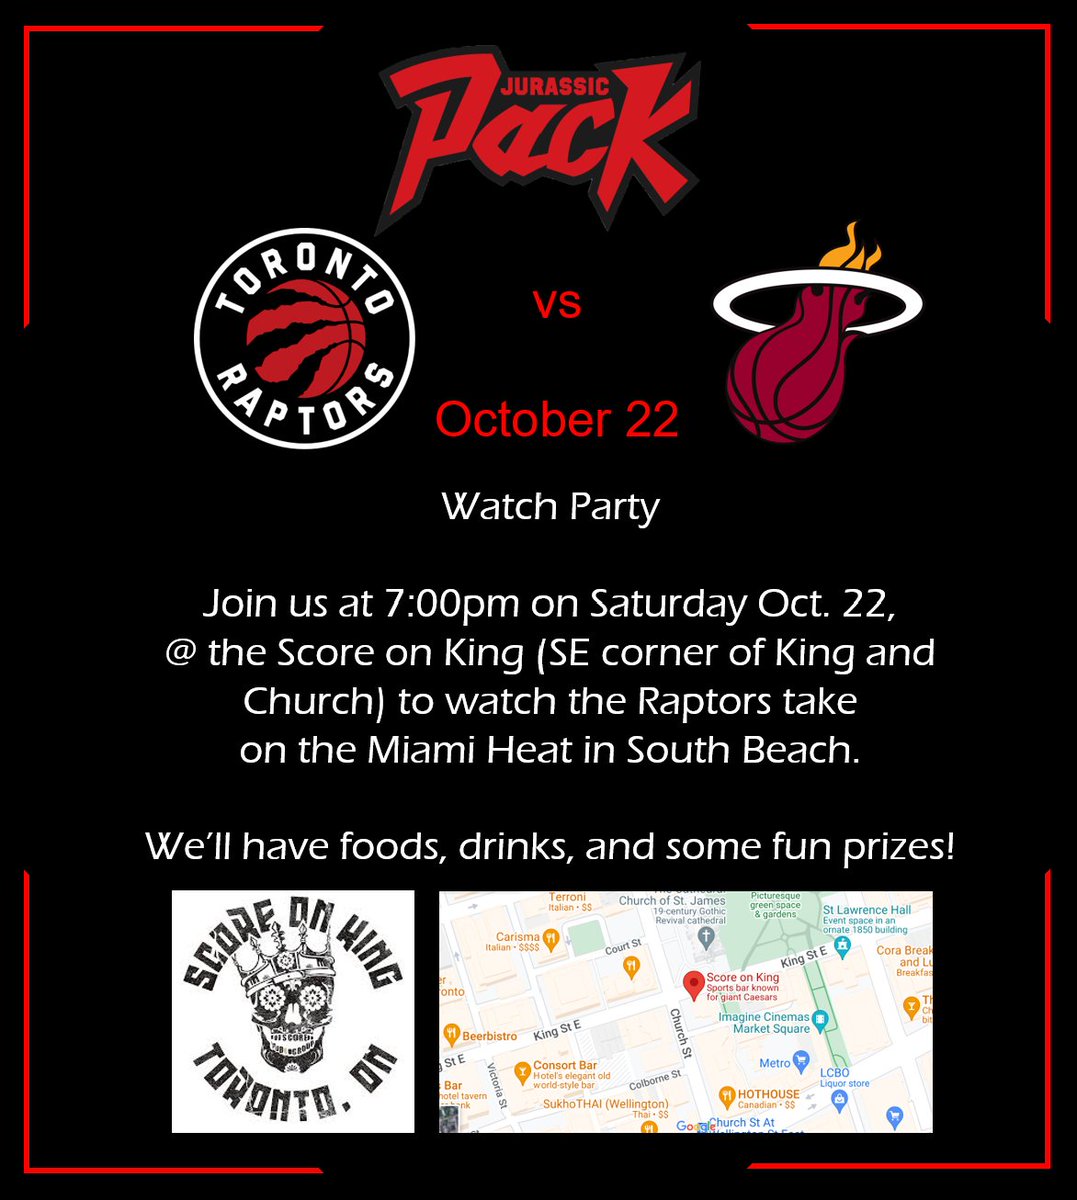 If you are a @Raptors @nbatopshot collector, or you're interested in learning more about Top Shot, come on out and watch the Raptors vs Heat game on Saturday night with @TheJurassicPack! We'll have food, drinks, and Top Shot and Jurassic Pack prizes! 🦖🥳